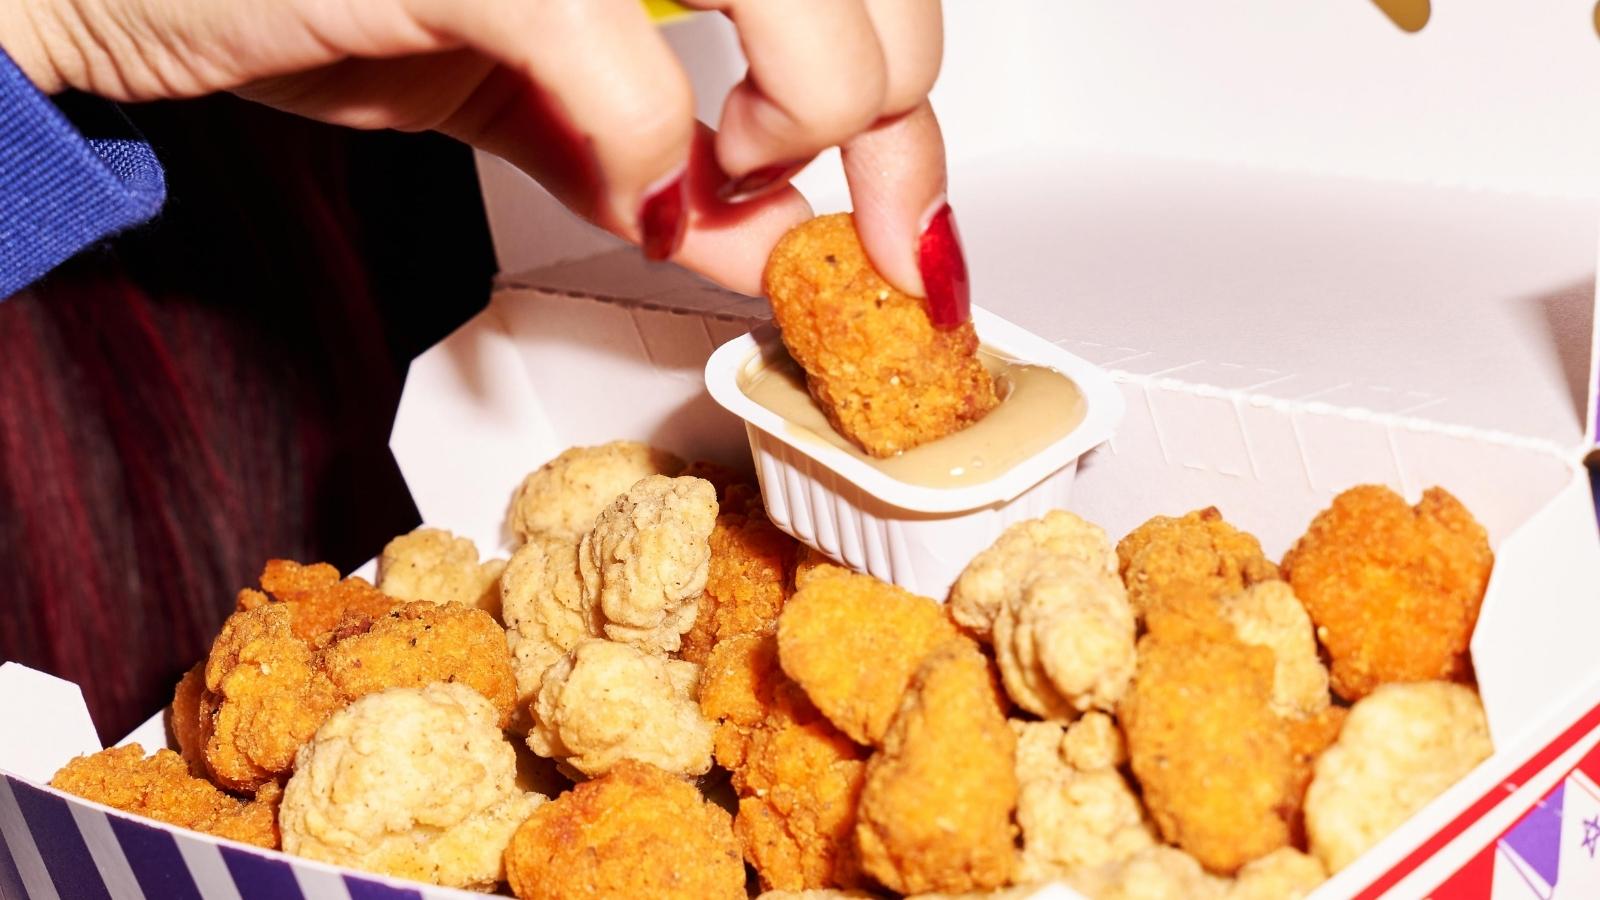 12 Best Chicken Franchises to Own in 2023